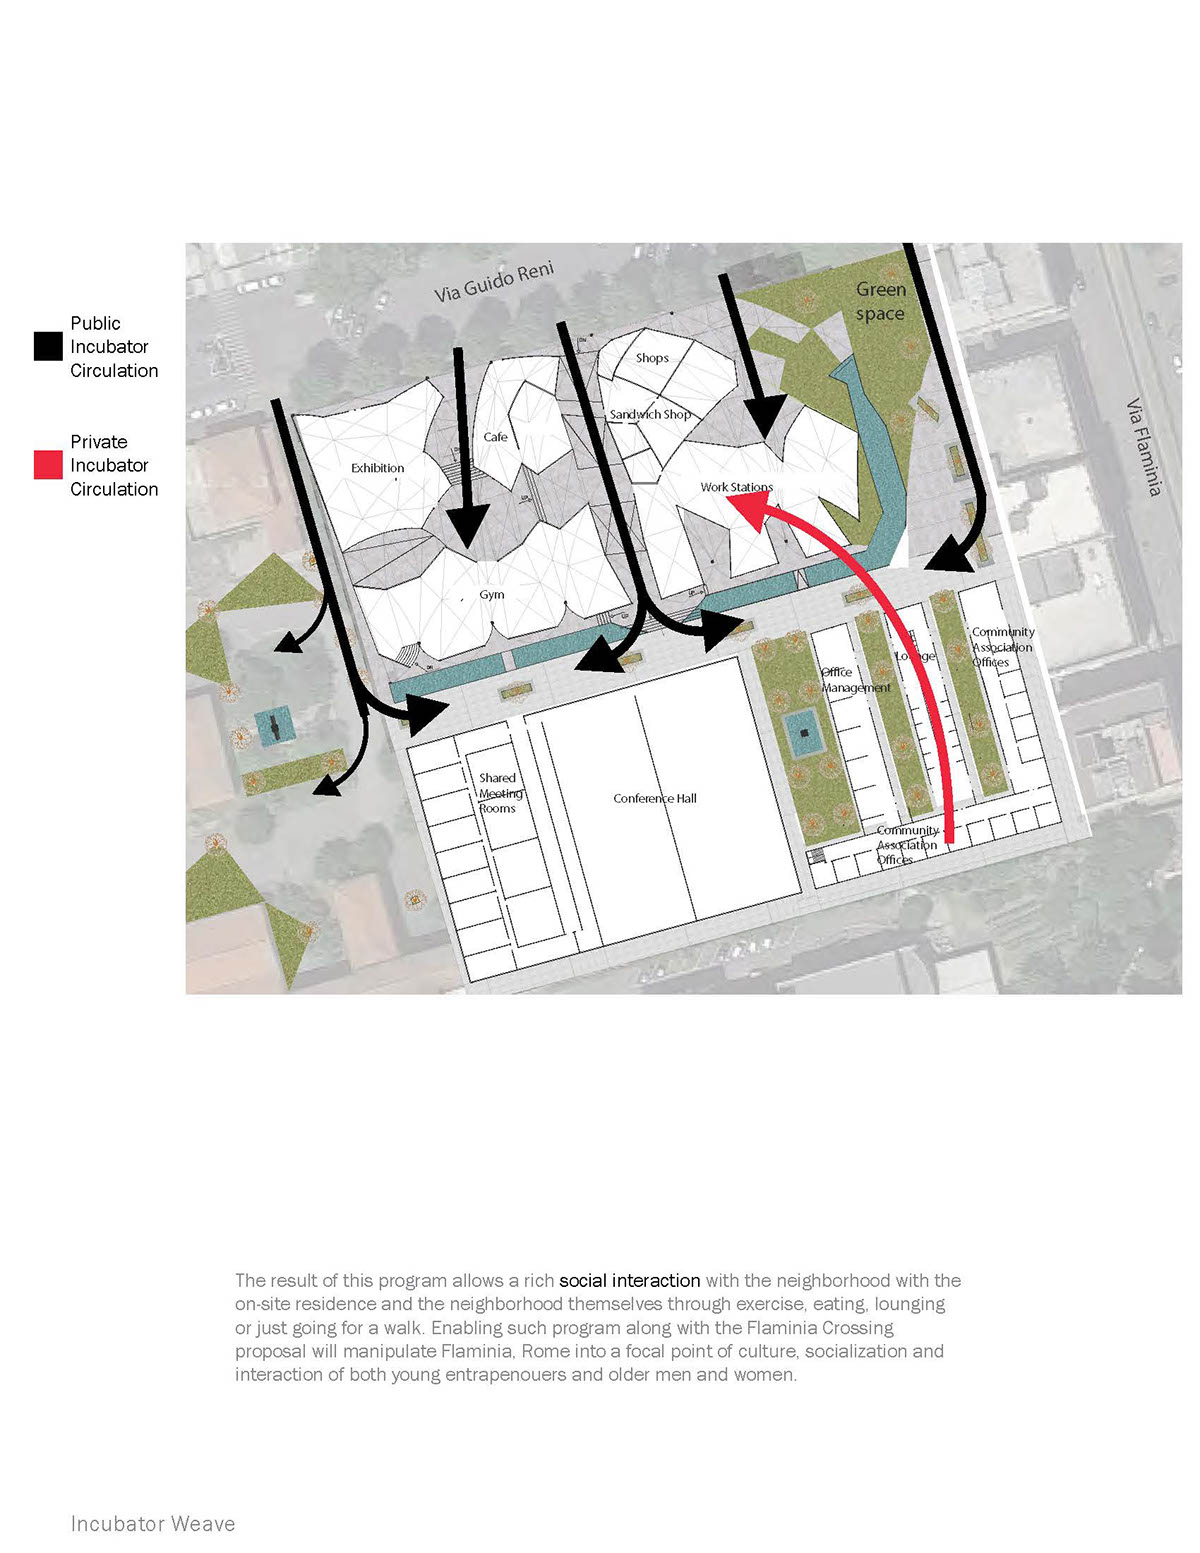 Disaster Relief Structure Incubator Community Center Graphite Rendering kinematic architecture Responsive Architecture